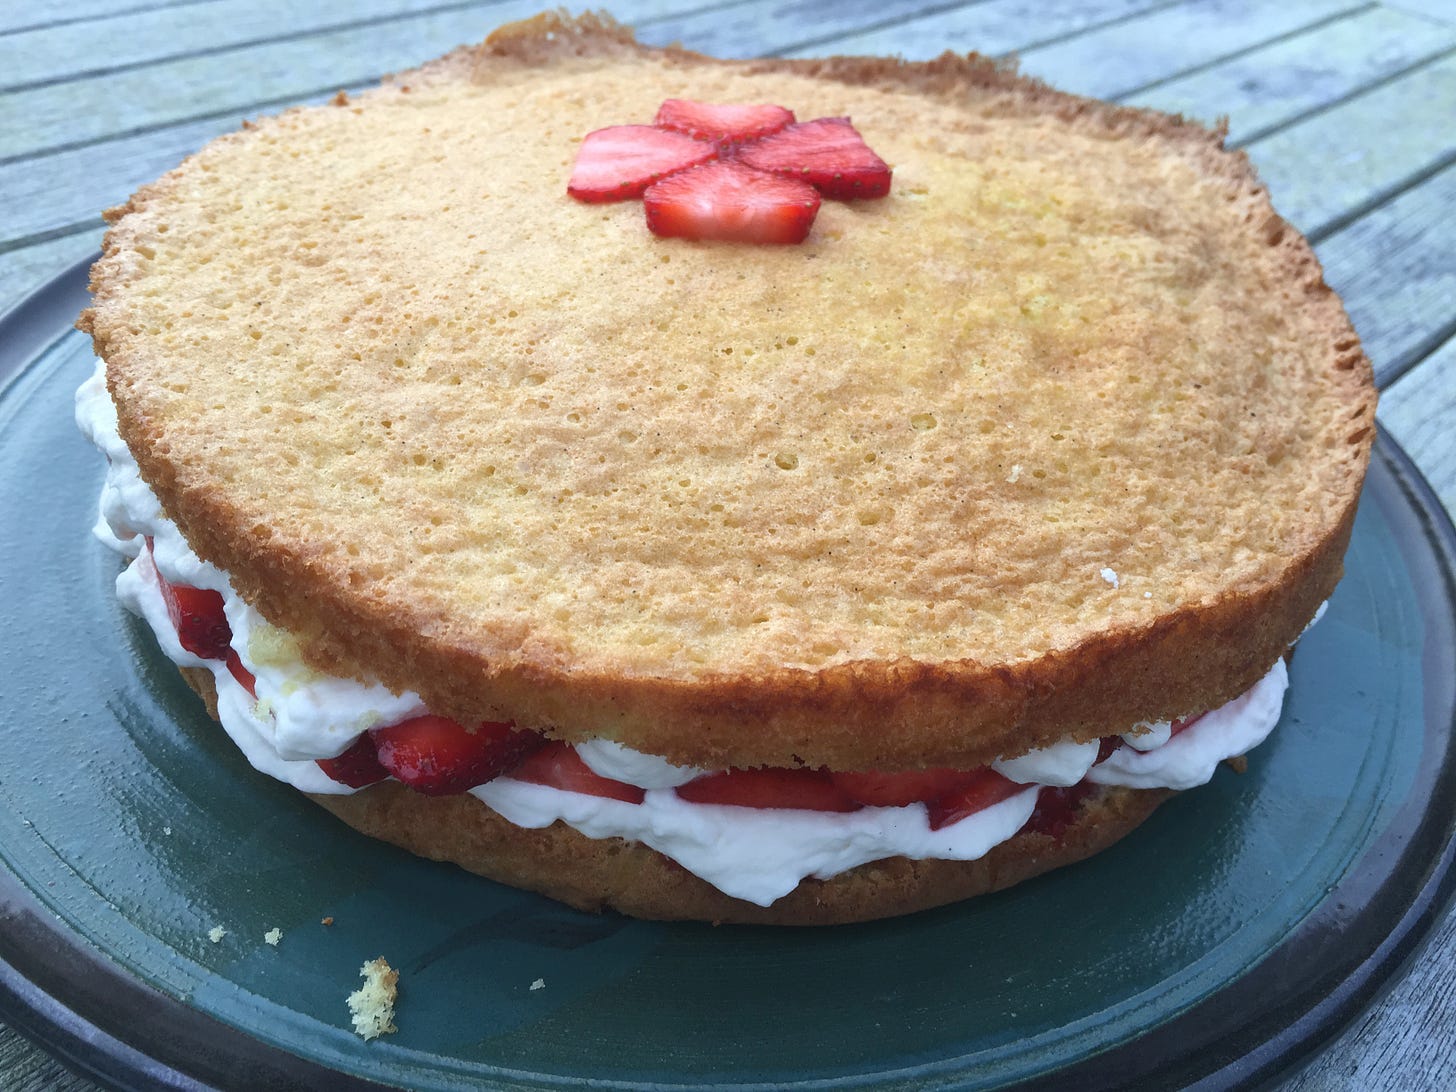 A large golden two-layer cake sits on a ceramic plate. It is filled with sliced strawberries and whipped cream, which is oozing out the sides.